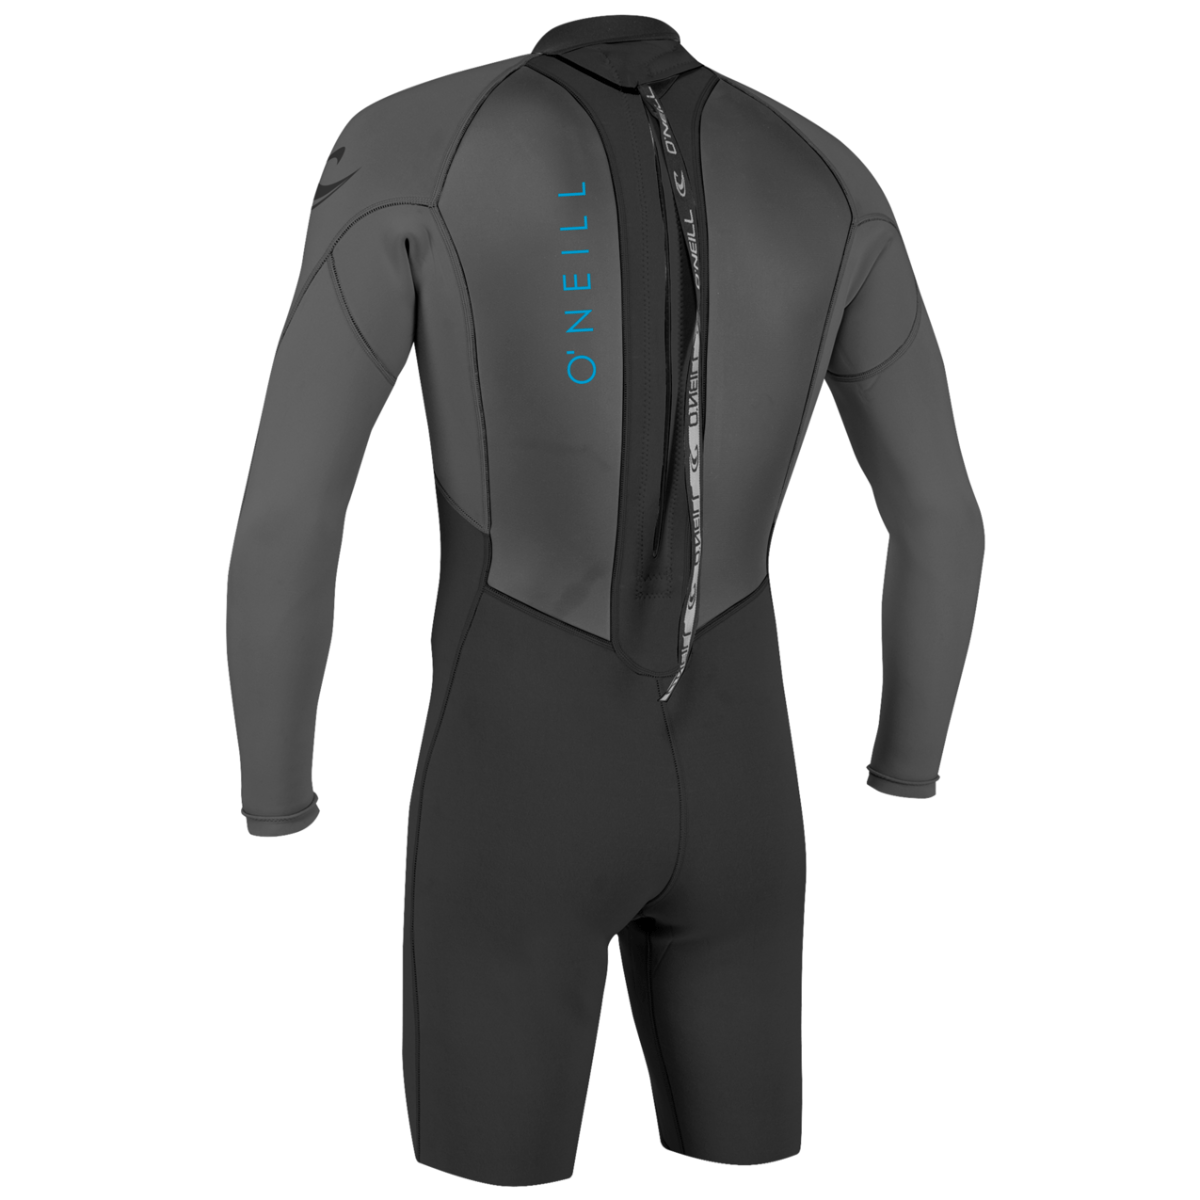 Oneill Youth Reactor-2 2mm Back Zip Long Sleeve Spring Suit in Black and Graphite - BoardCo